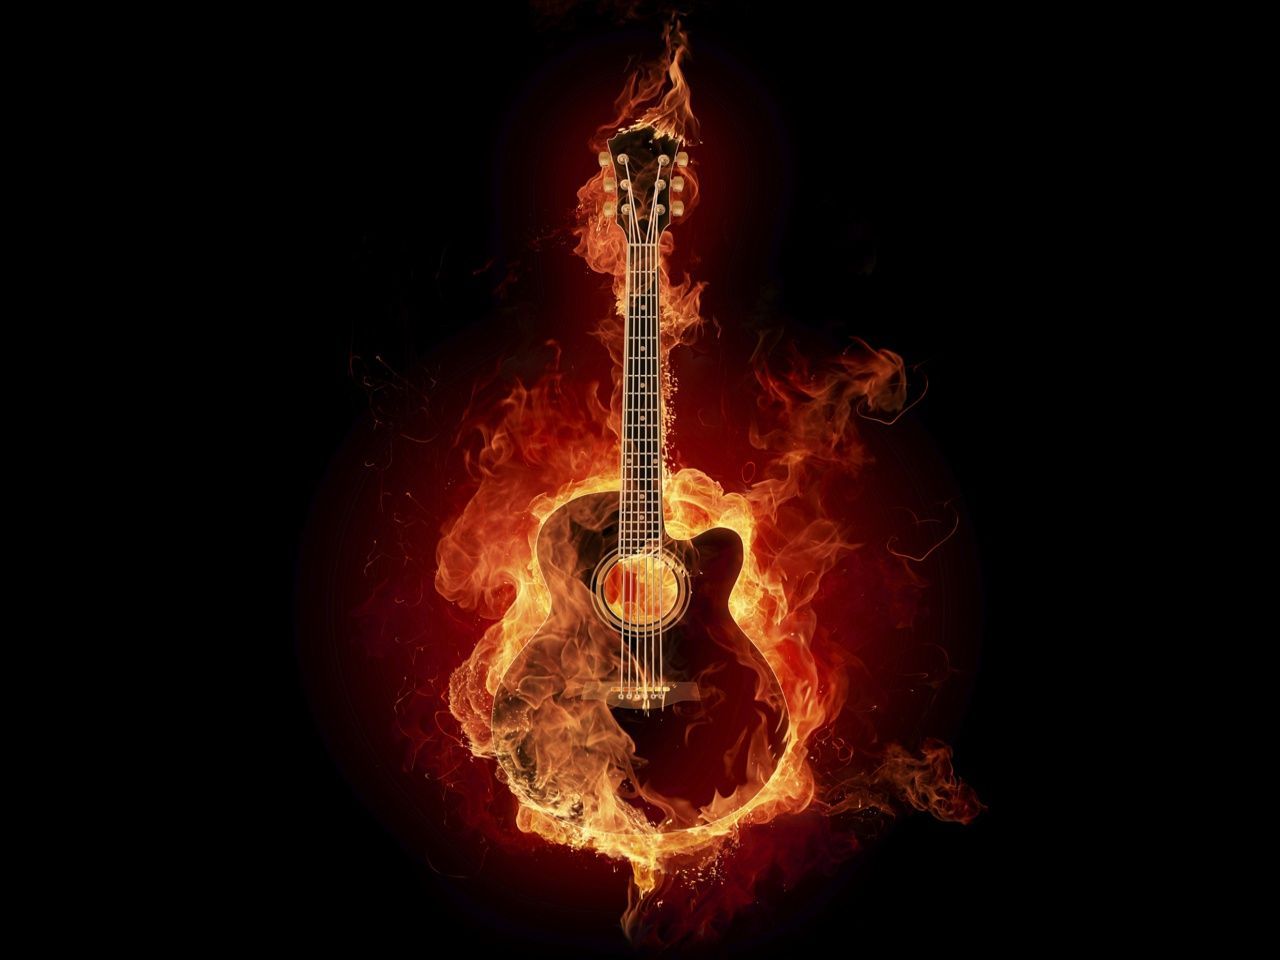 flames on fire. Fire Flame Guitar music wallpaper in 1280x960